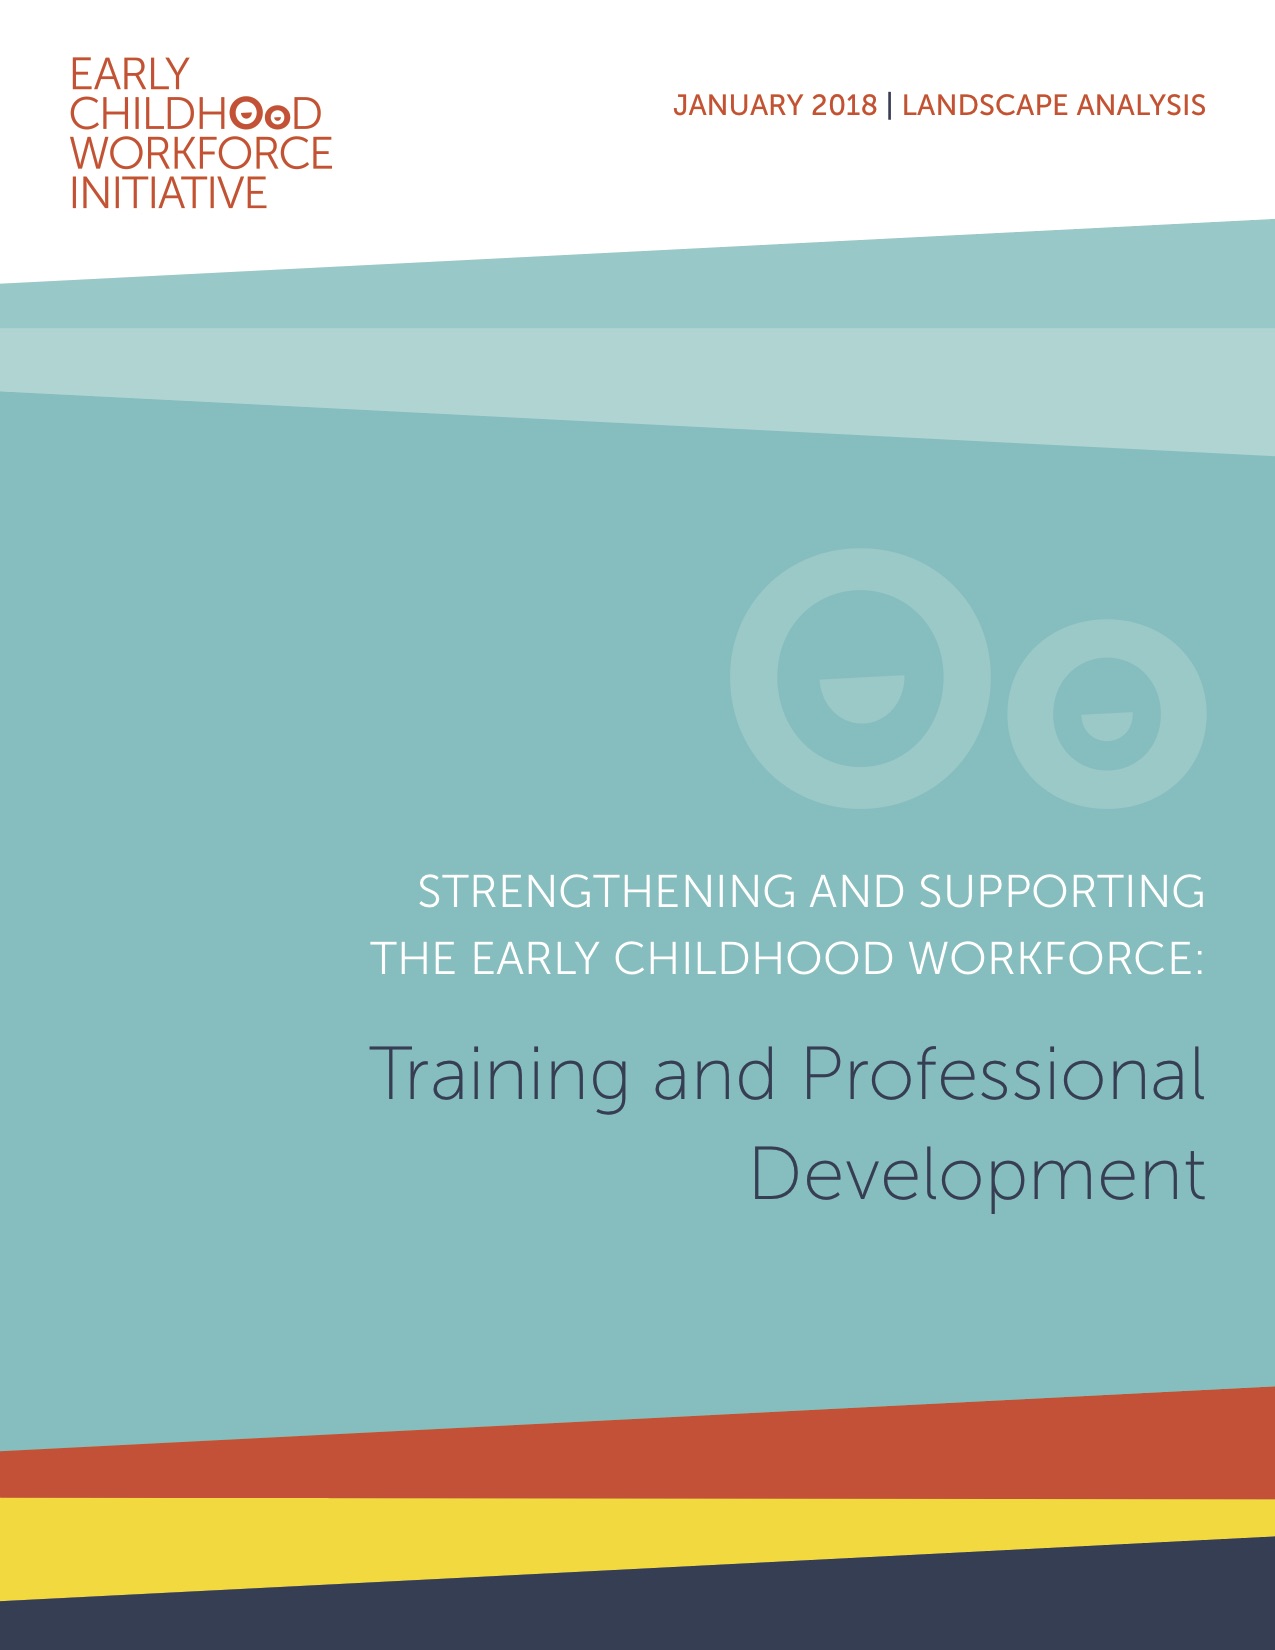 Training and Professional Development cover.jpg 